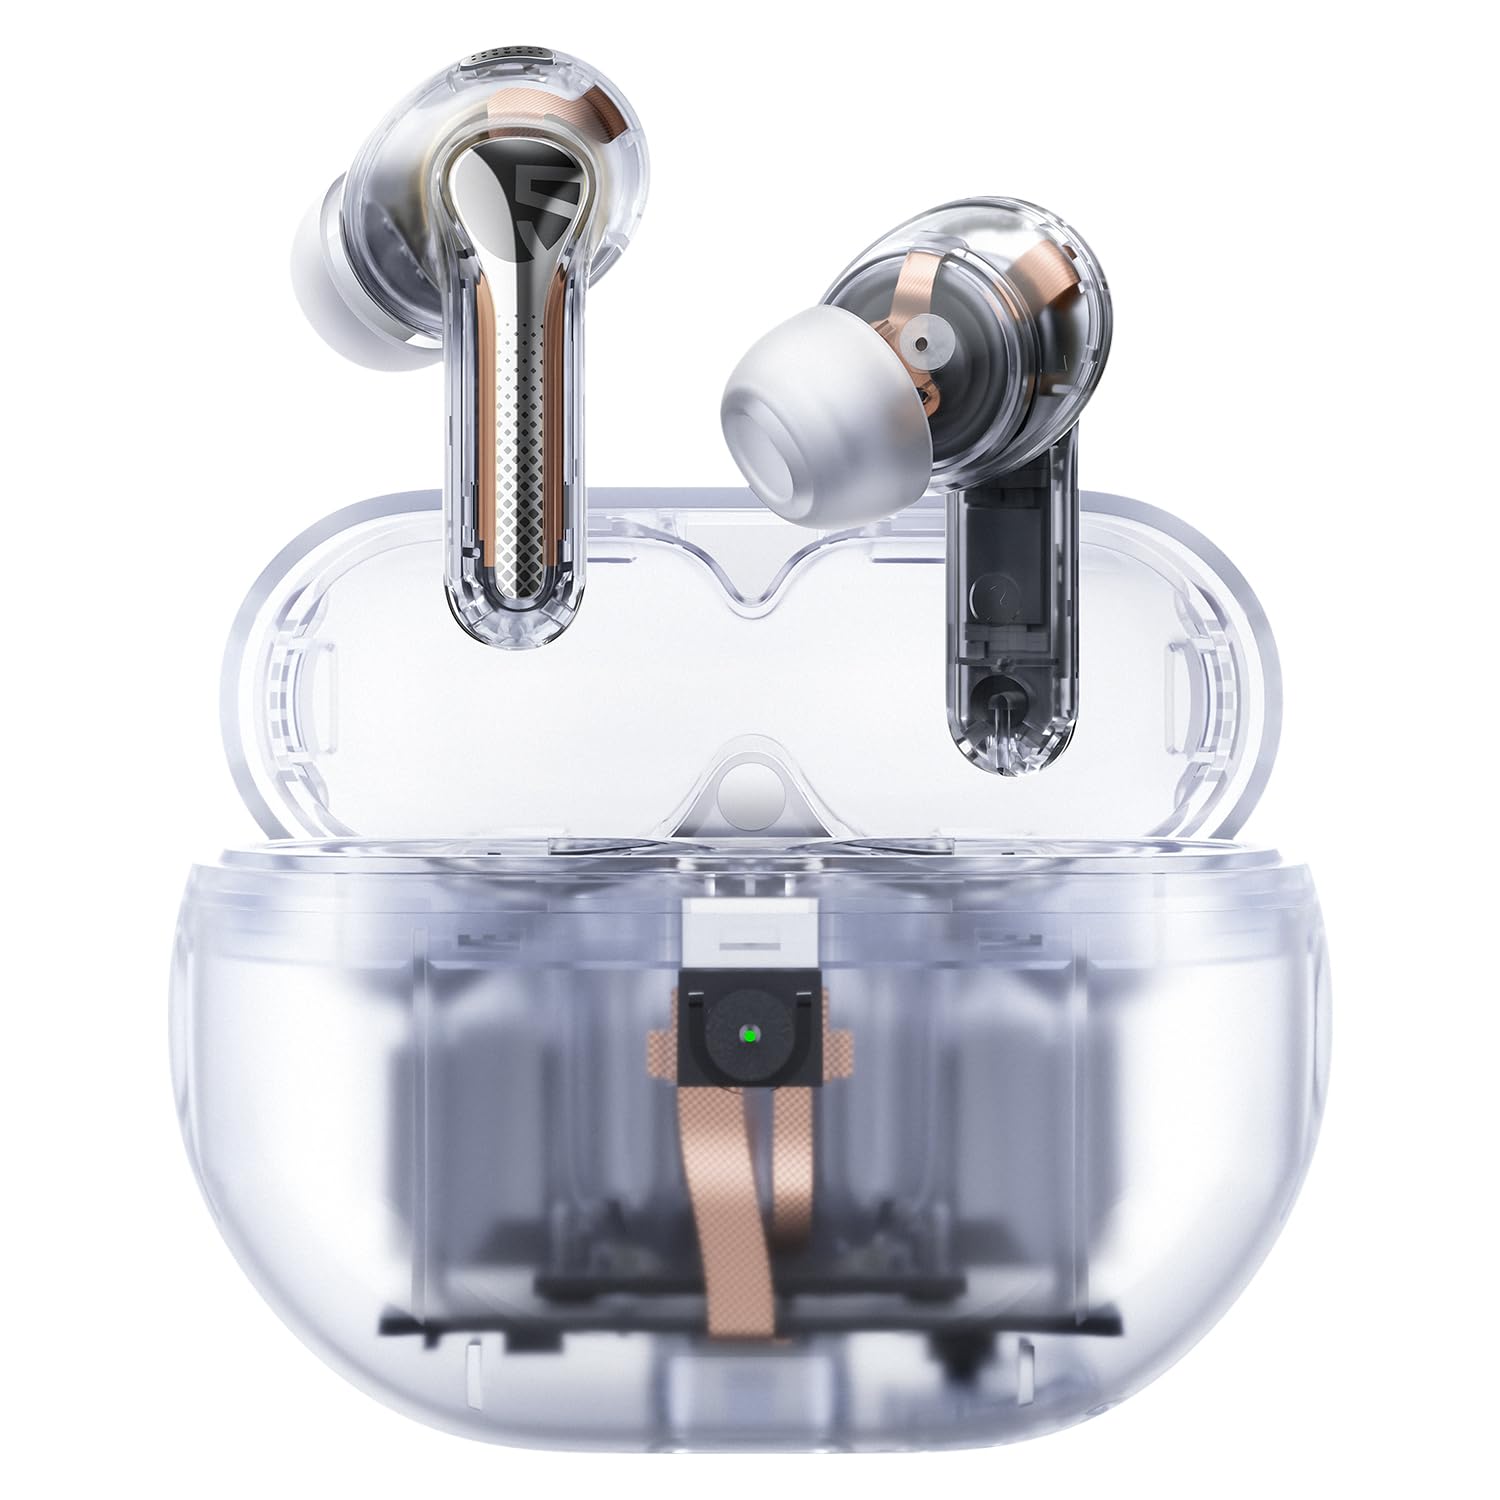 SoundPEATS Capsule 3 Pro Transparent ANC Wireless Earbuds with LDAC